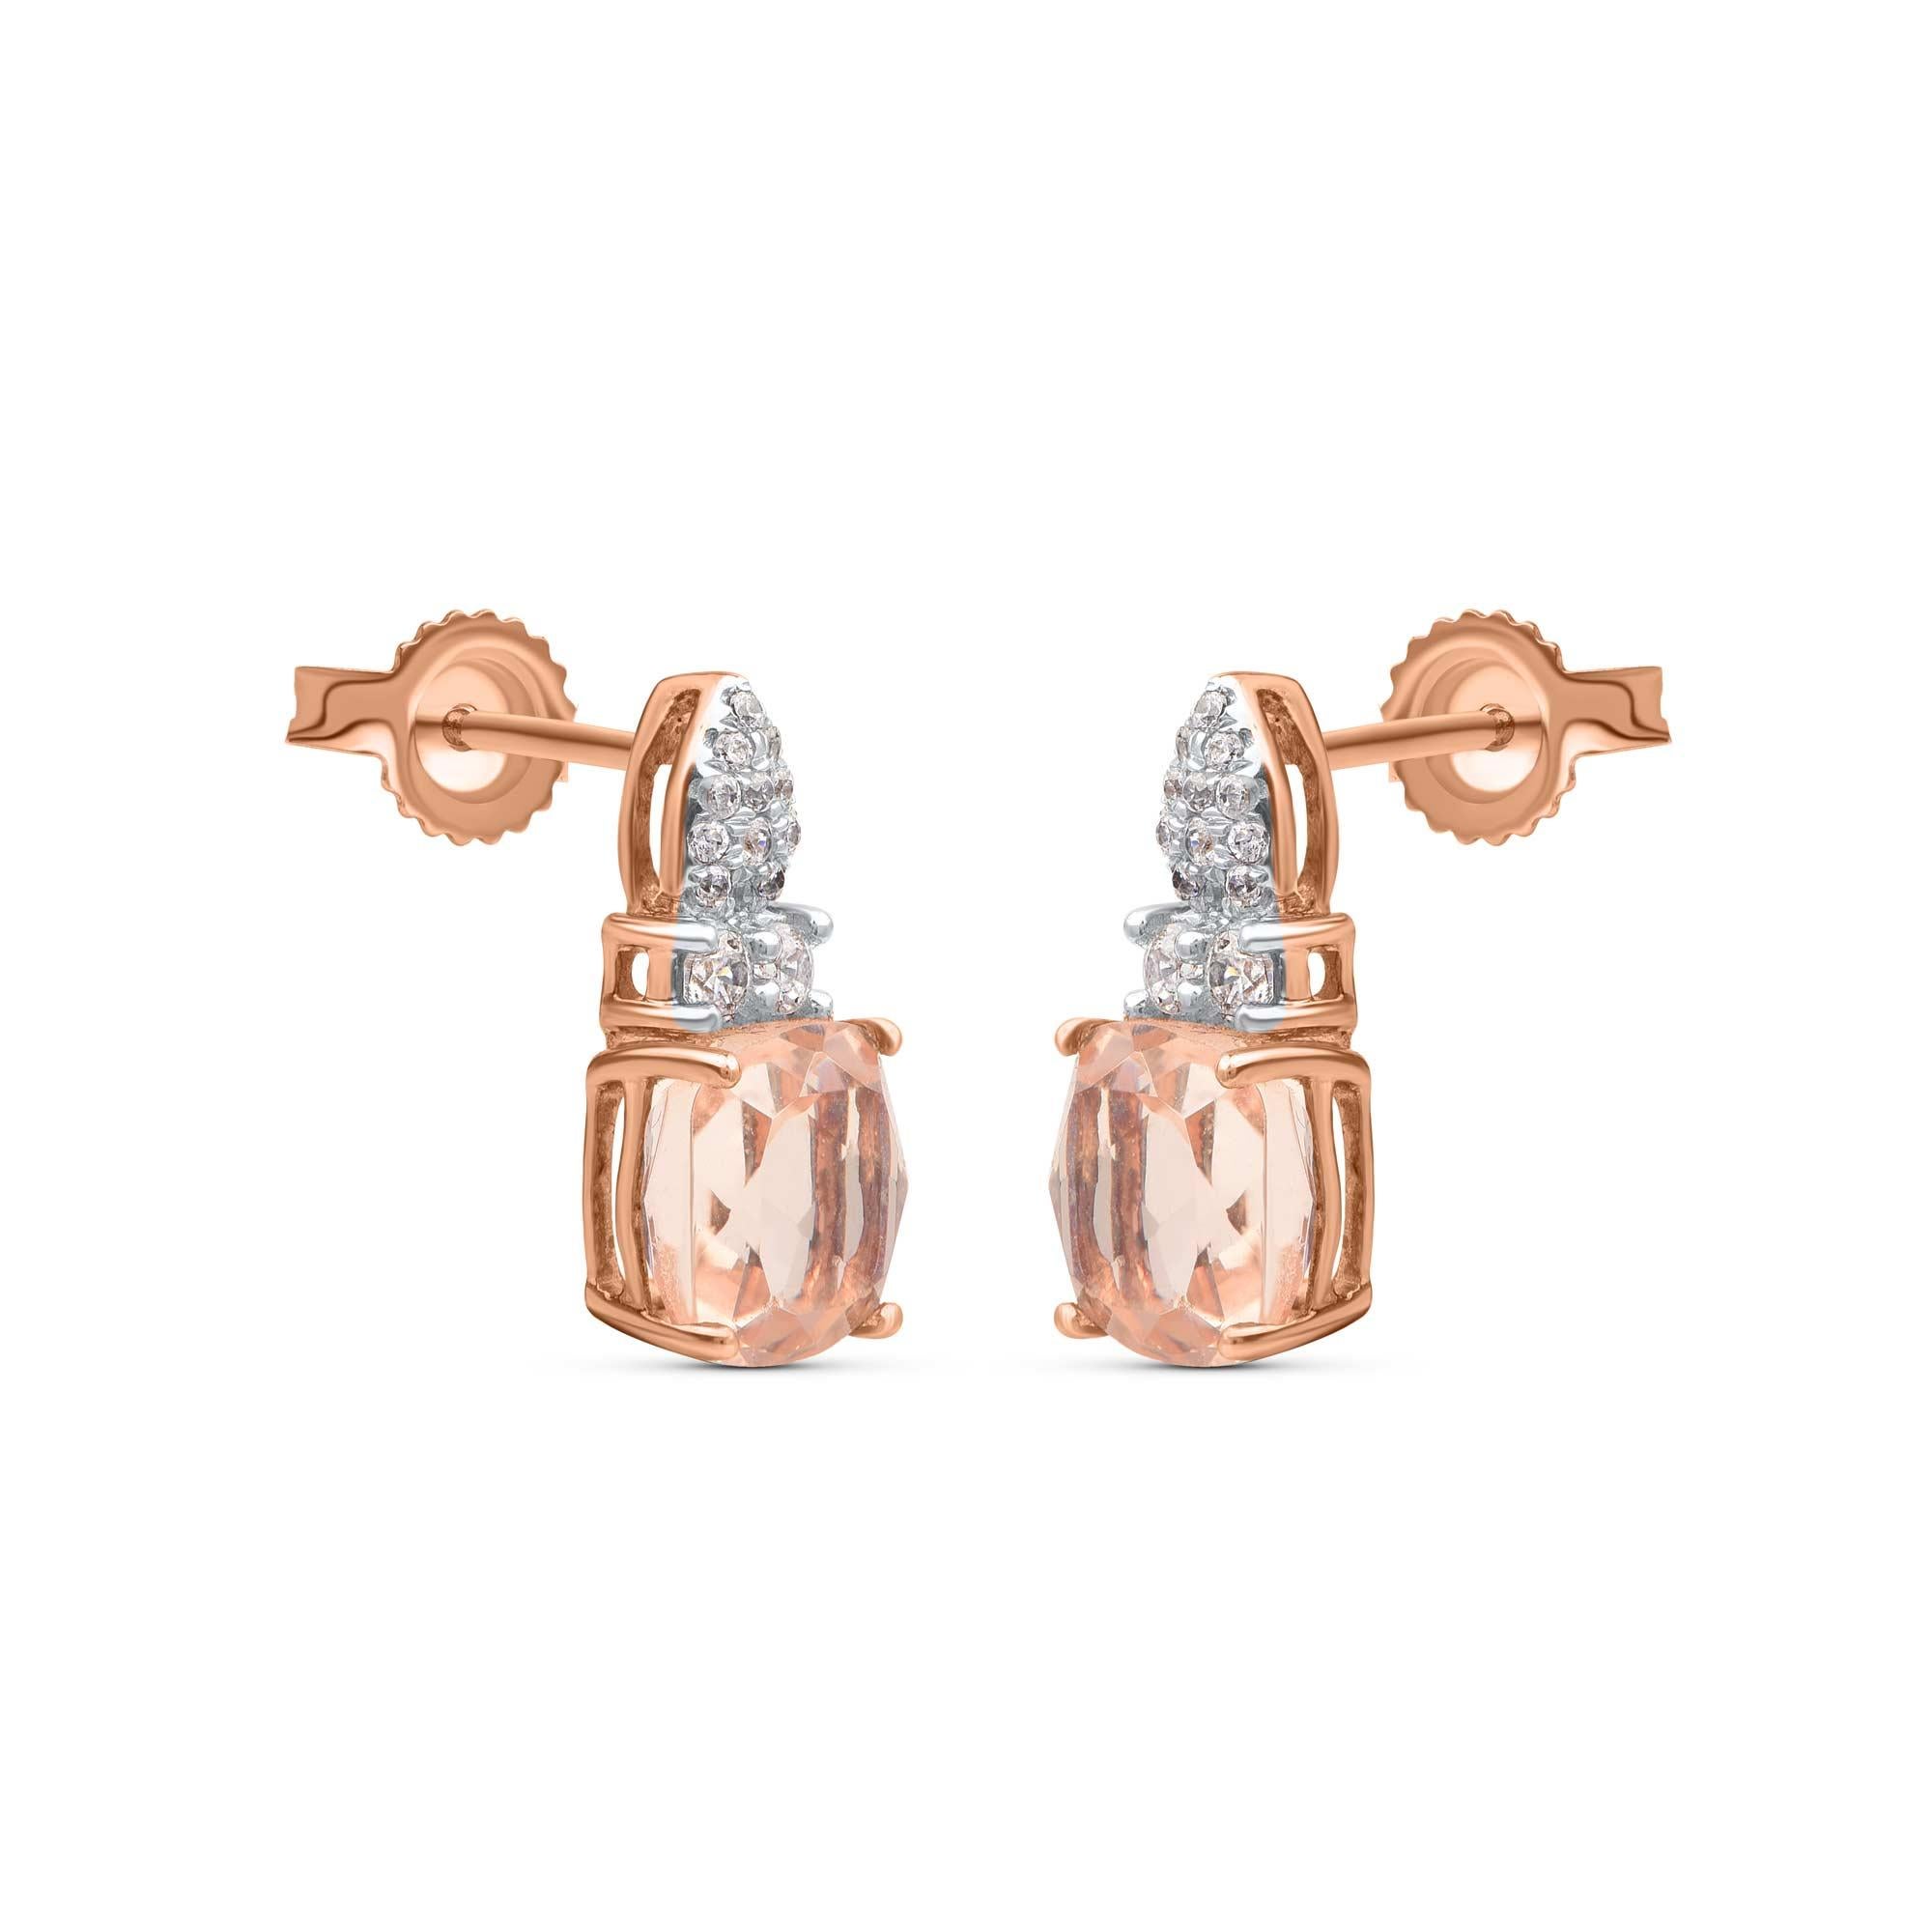 These morganite and diamond stud earrings are perfect for everyday wear. Expertly handcrafted in 18 KT rose gold and studded with 28 brilliant 2 natural morganite stone in prong setting. Diamonds are graded H-I Color, I2 Clarity. 

This piece is